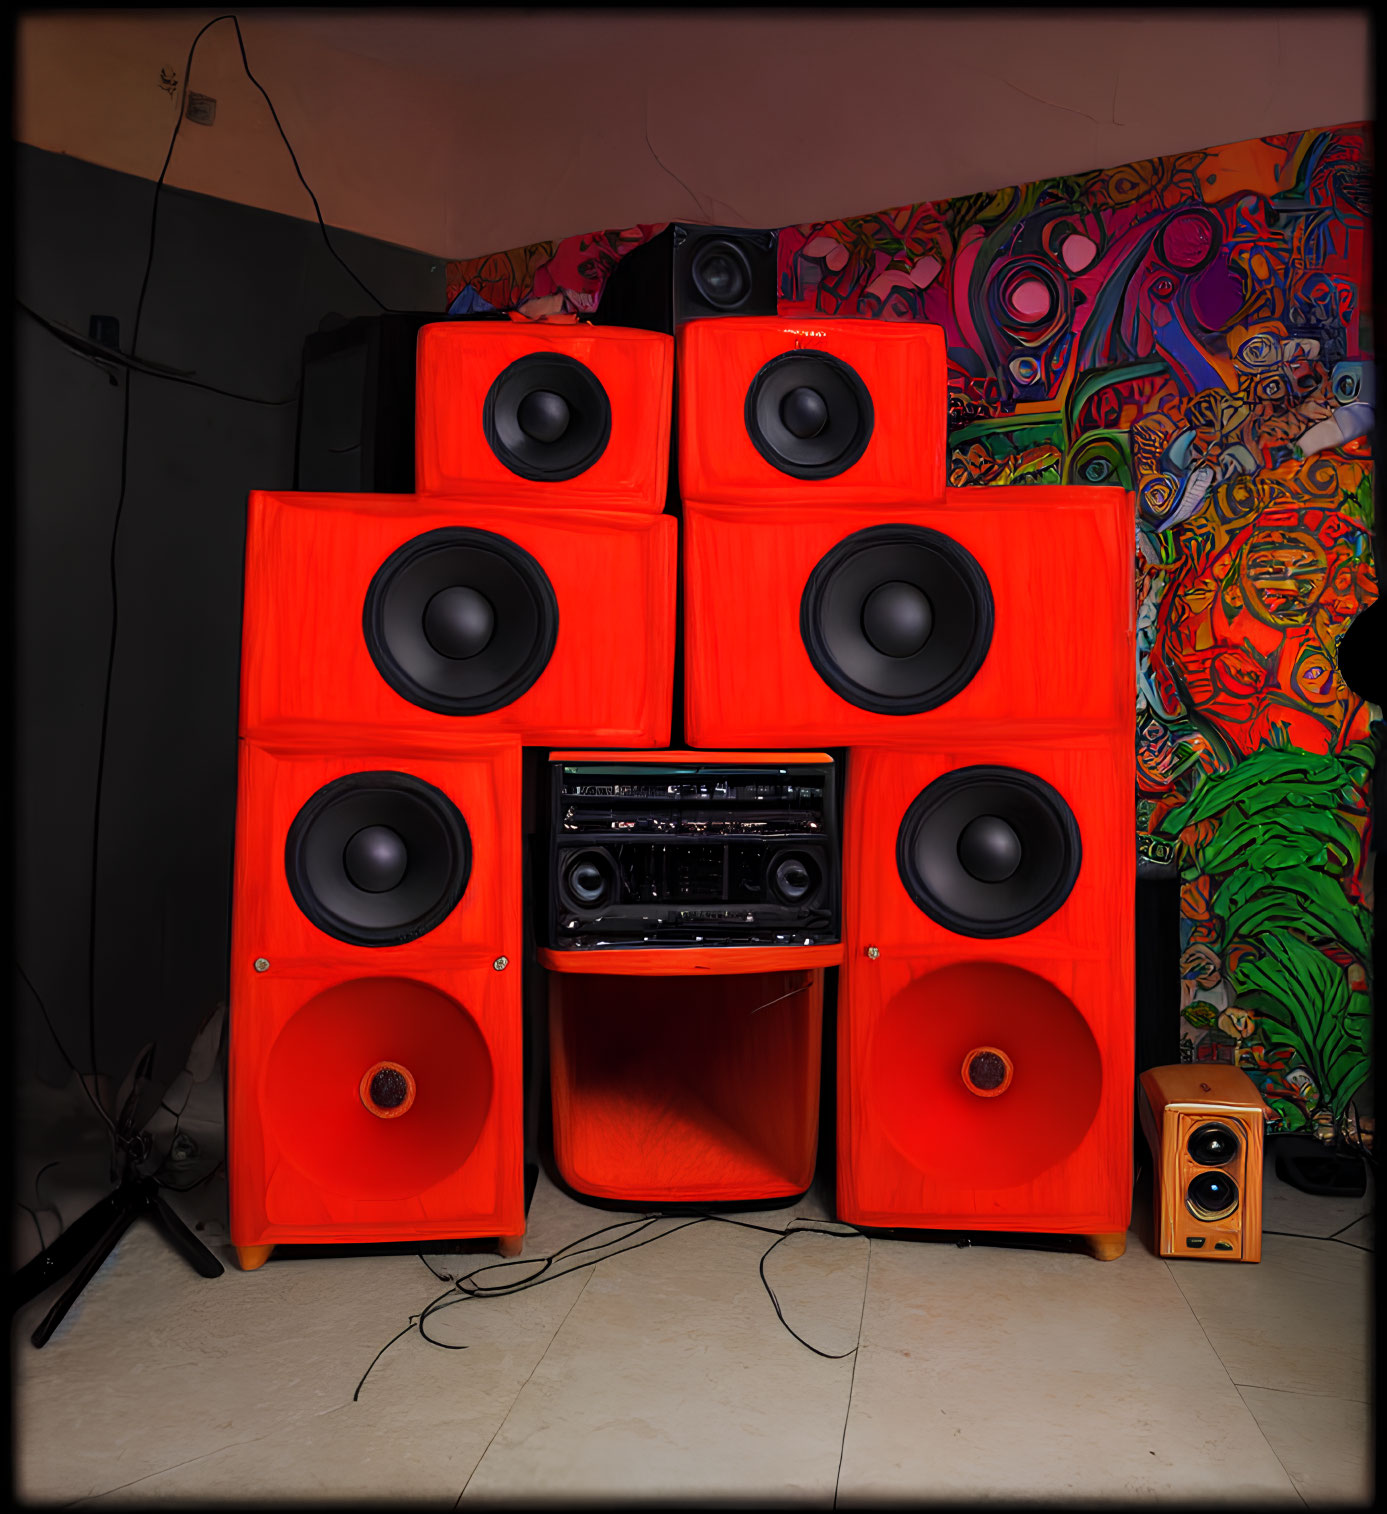 Red Speaker System with Black Amplifier and Graffiti Background